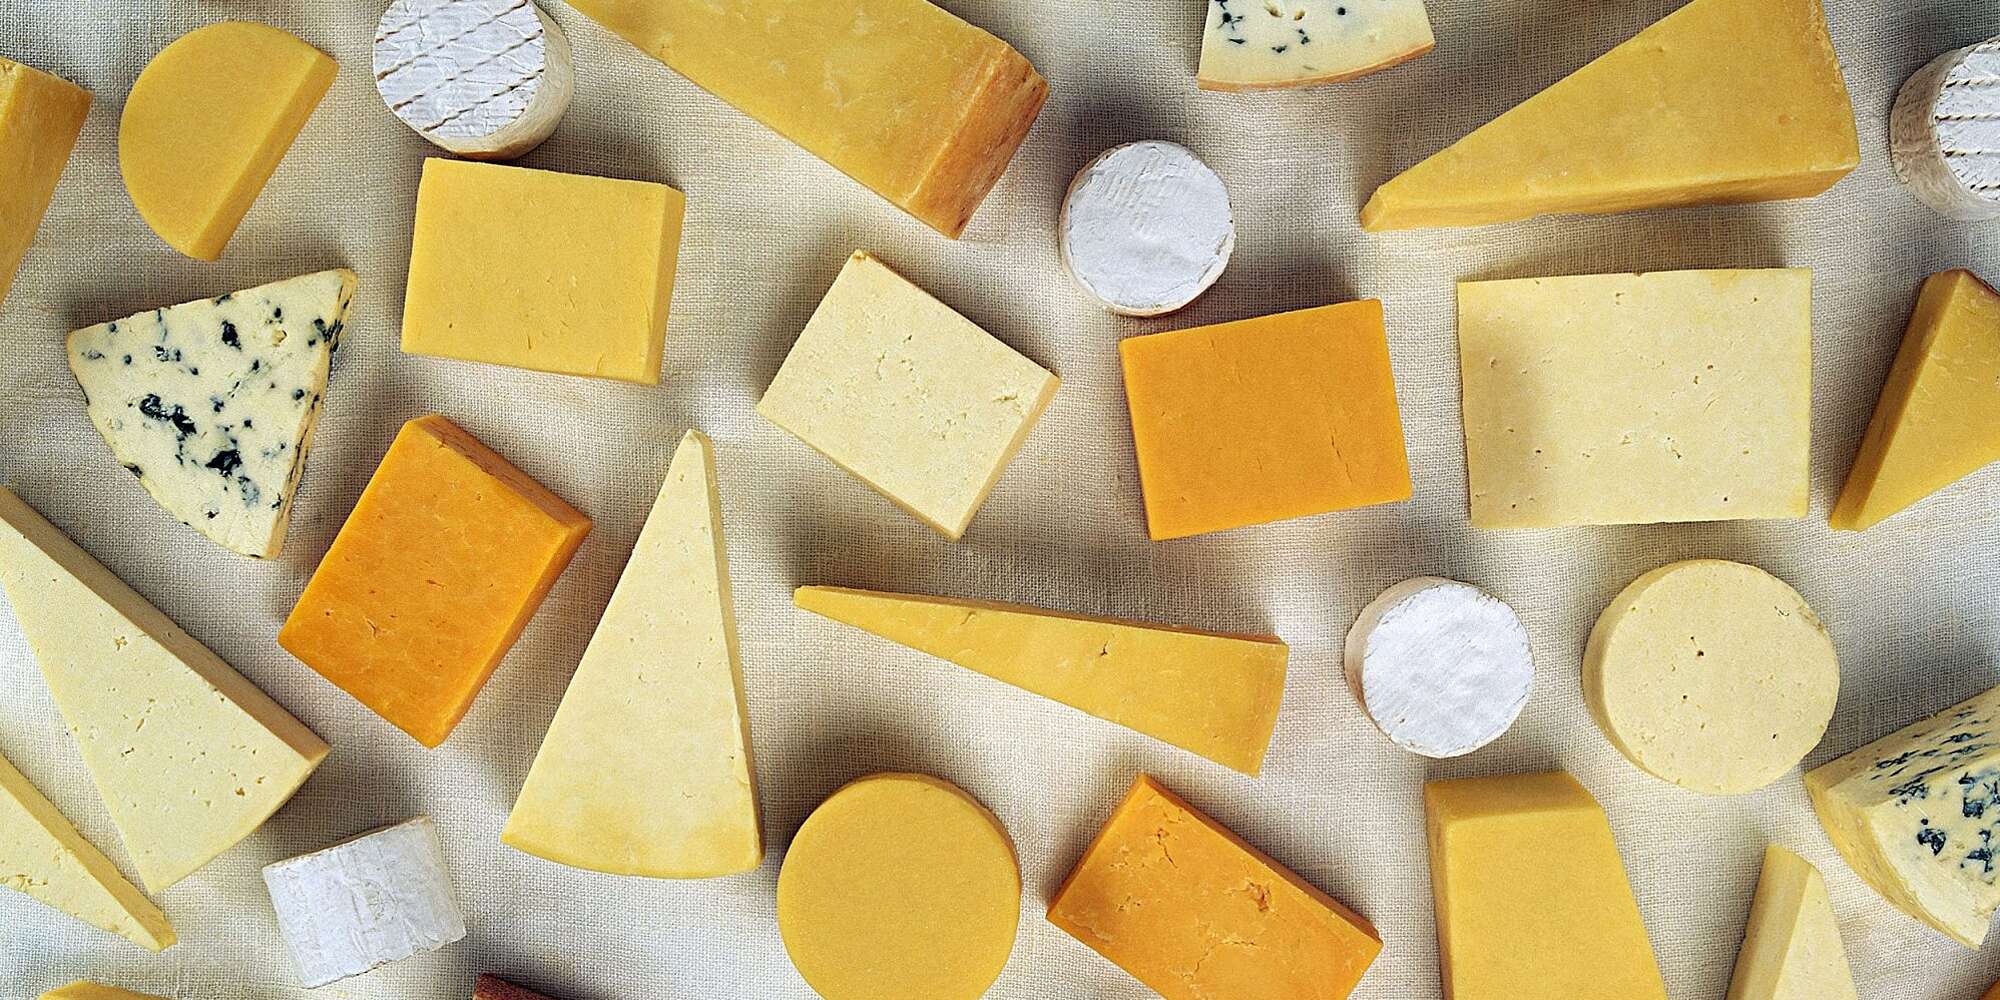 Naturally Lactose-Free Cheese Is More Common Than You Think | MyRecipes